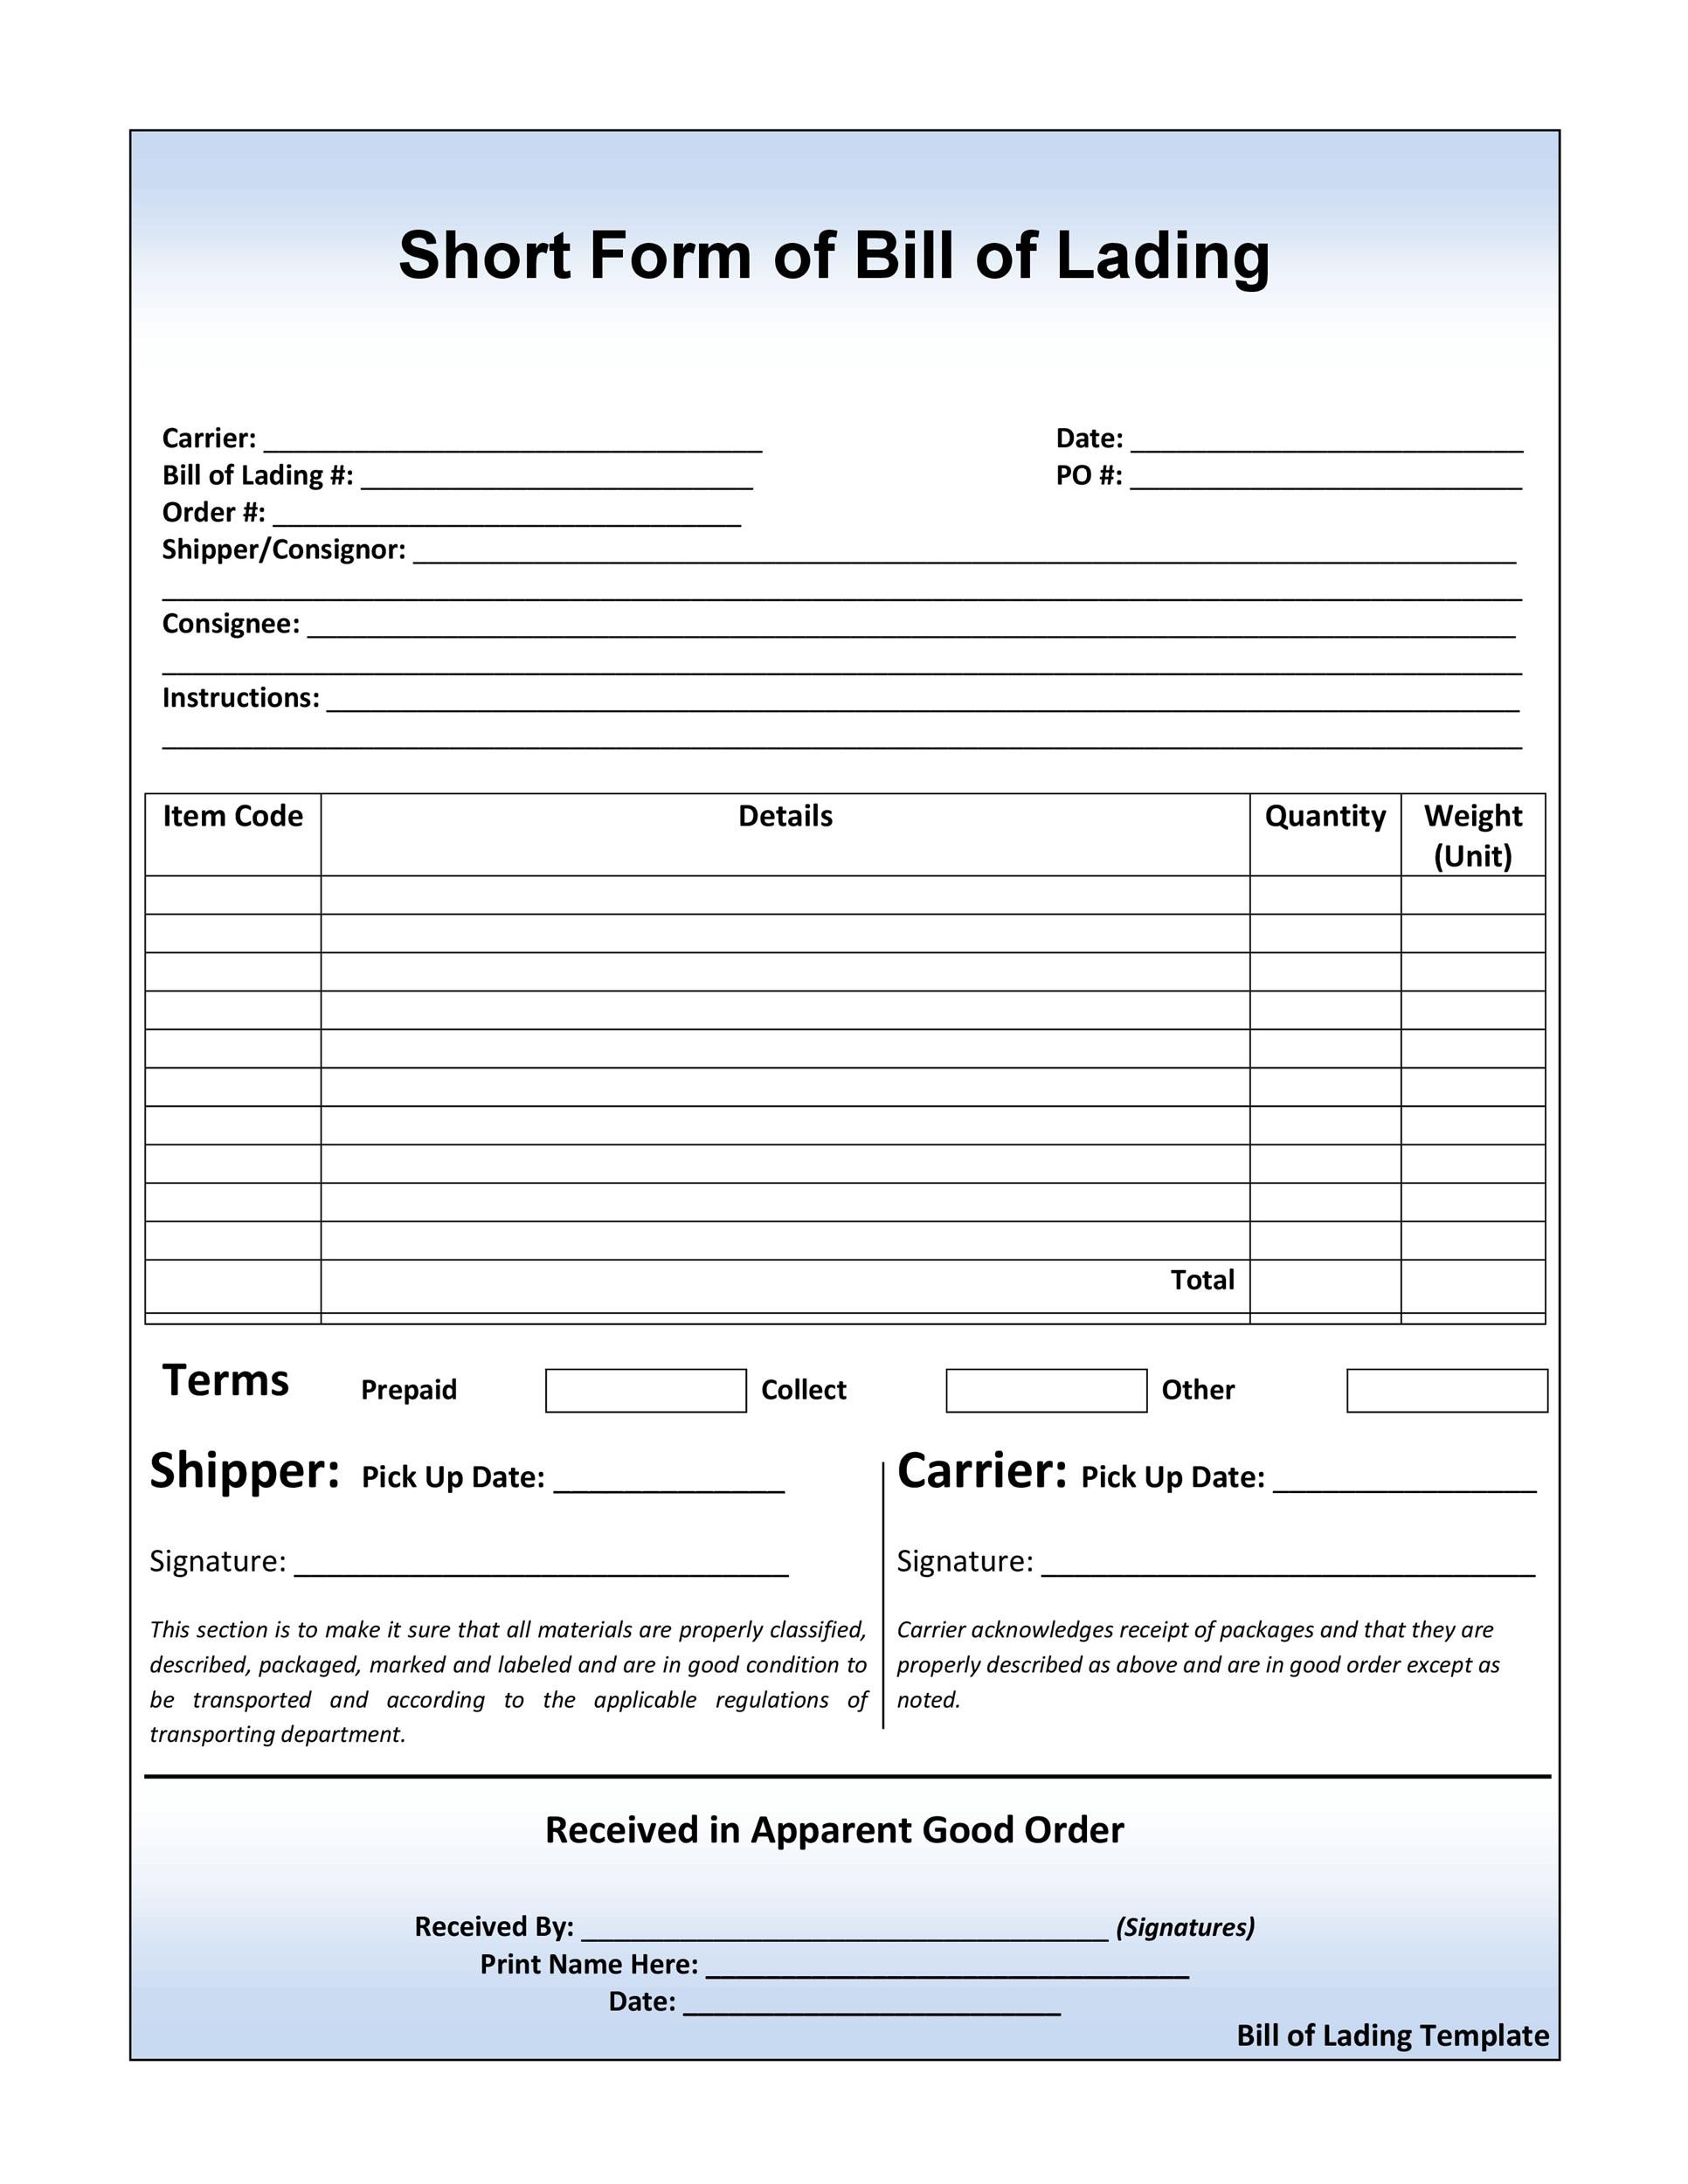 Bill Of Lading Form FREE DOWNLOAD Aashe